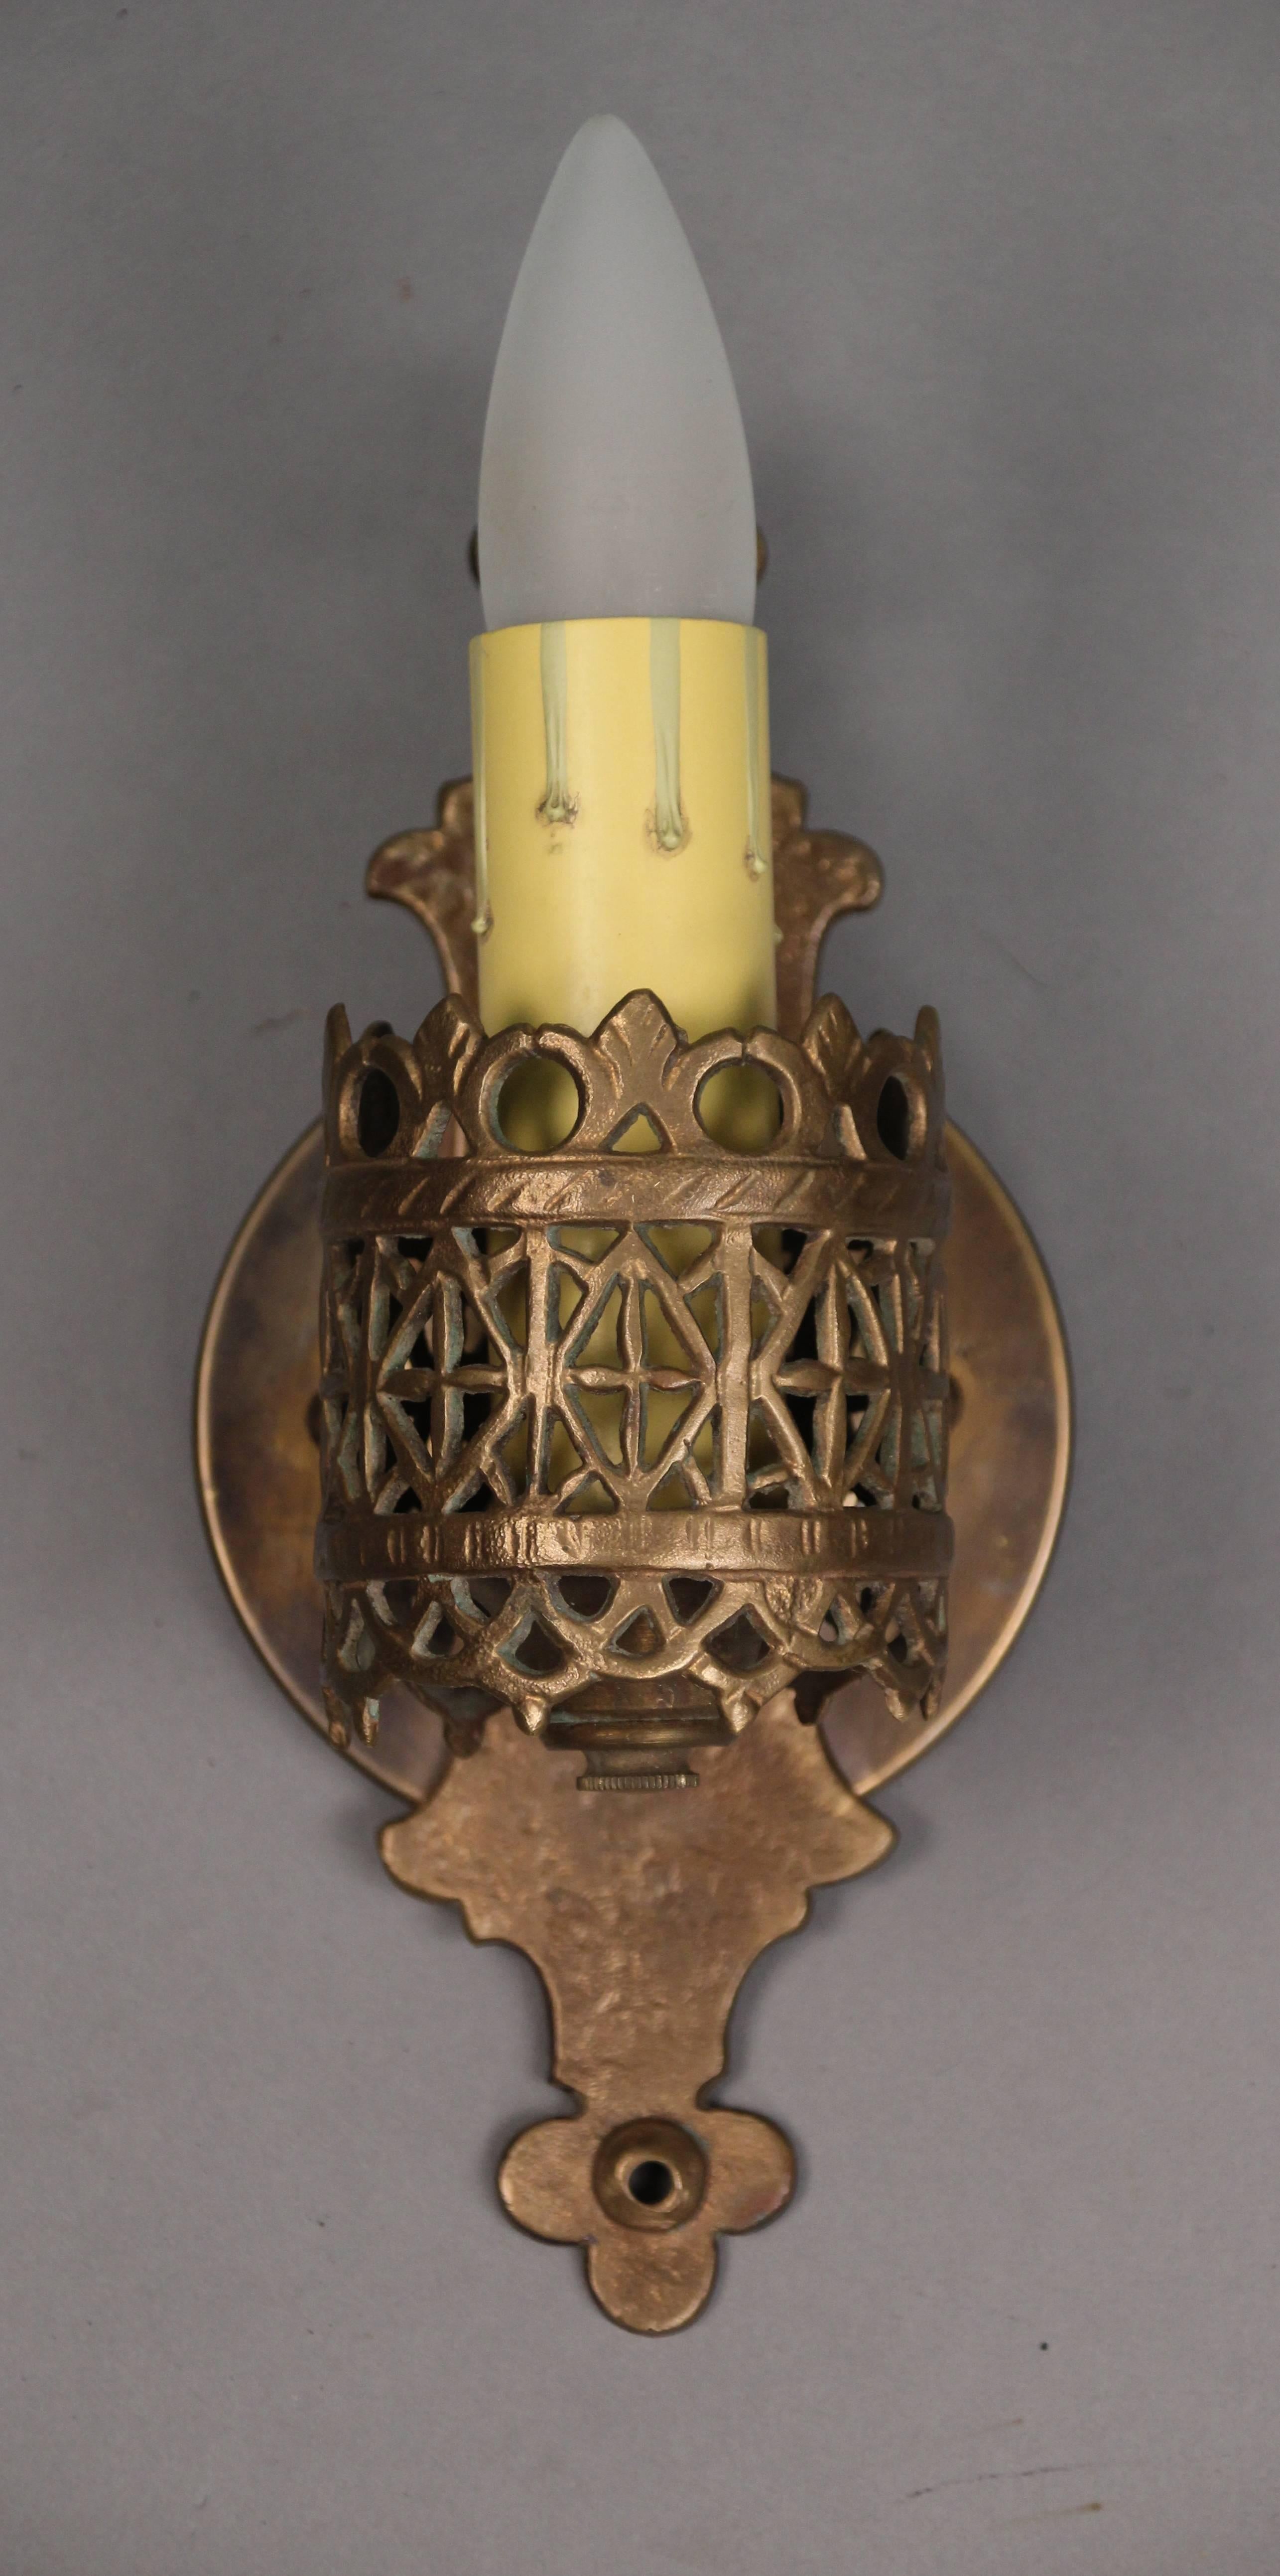 Pair of 20th century bronze signed single sconces made by renown New York metal craftsman Oscar Bach whose work is found at the Metropolitan Museum of Art.